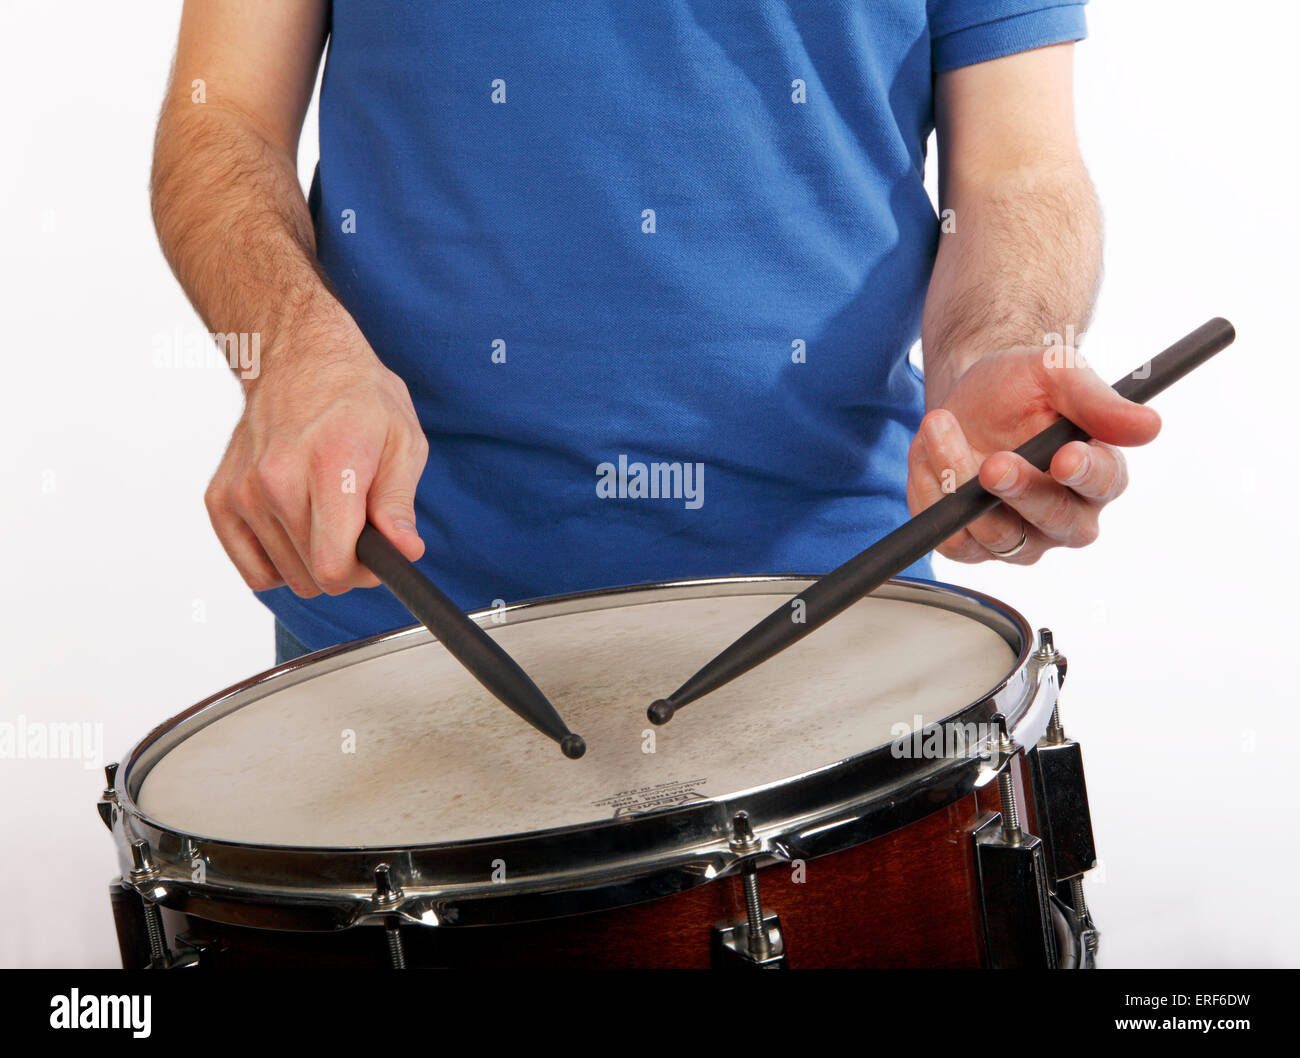 Snare drum technique, orthodox or standard grip. Stock Photo